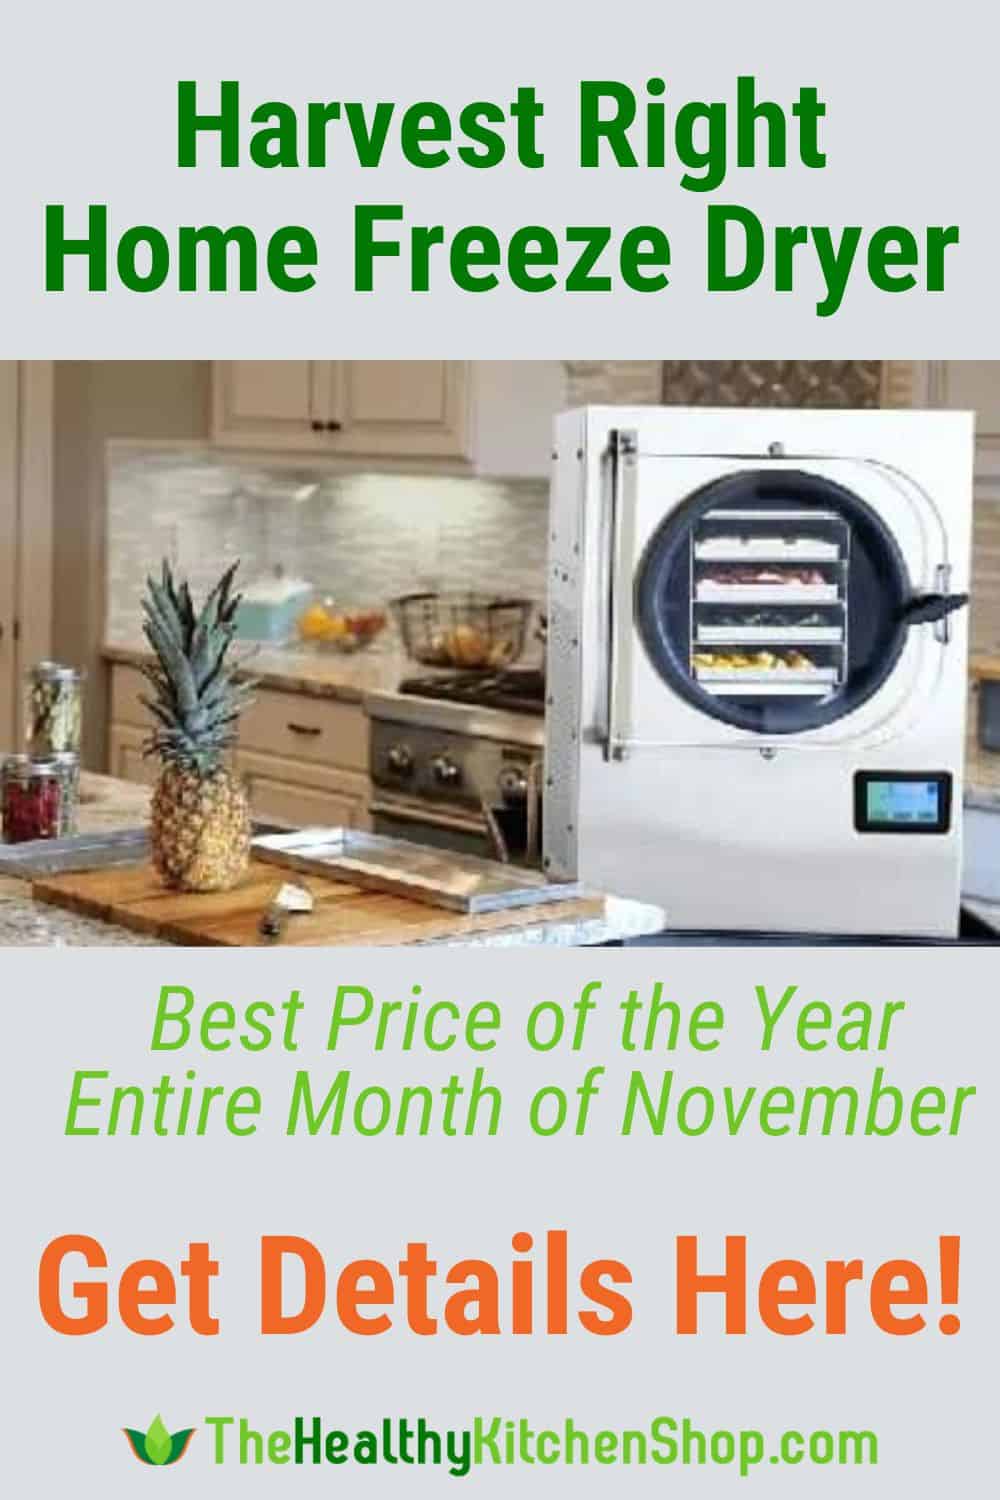 Harvest Right Home Freeze Dryer Review